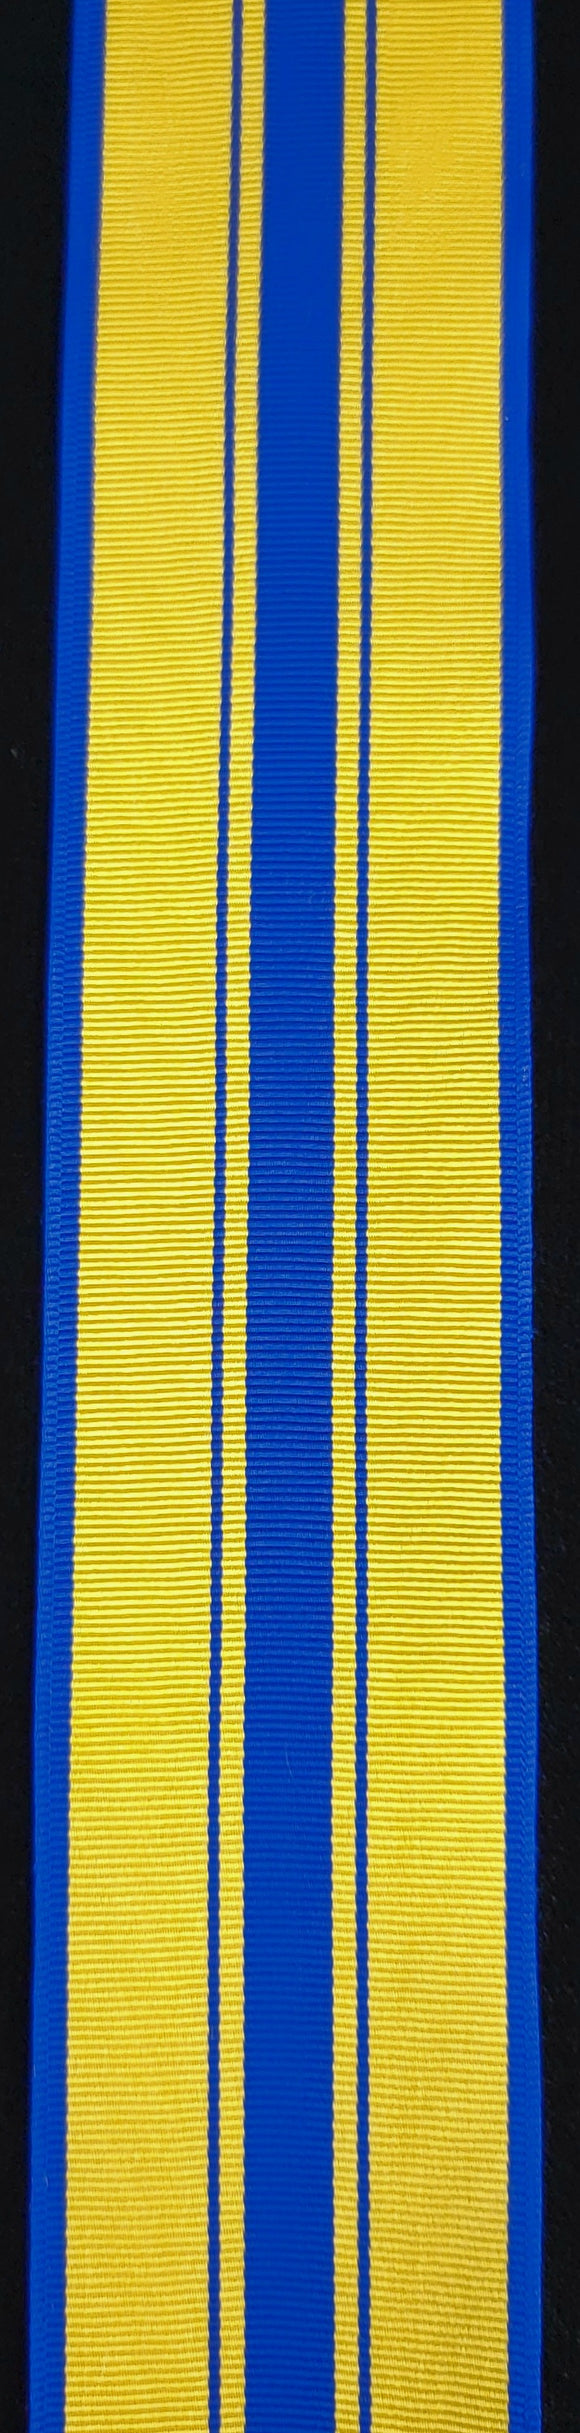 Ribbon, US Air Force Commendation Medal